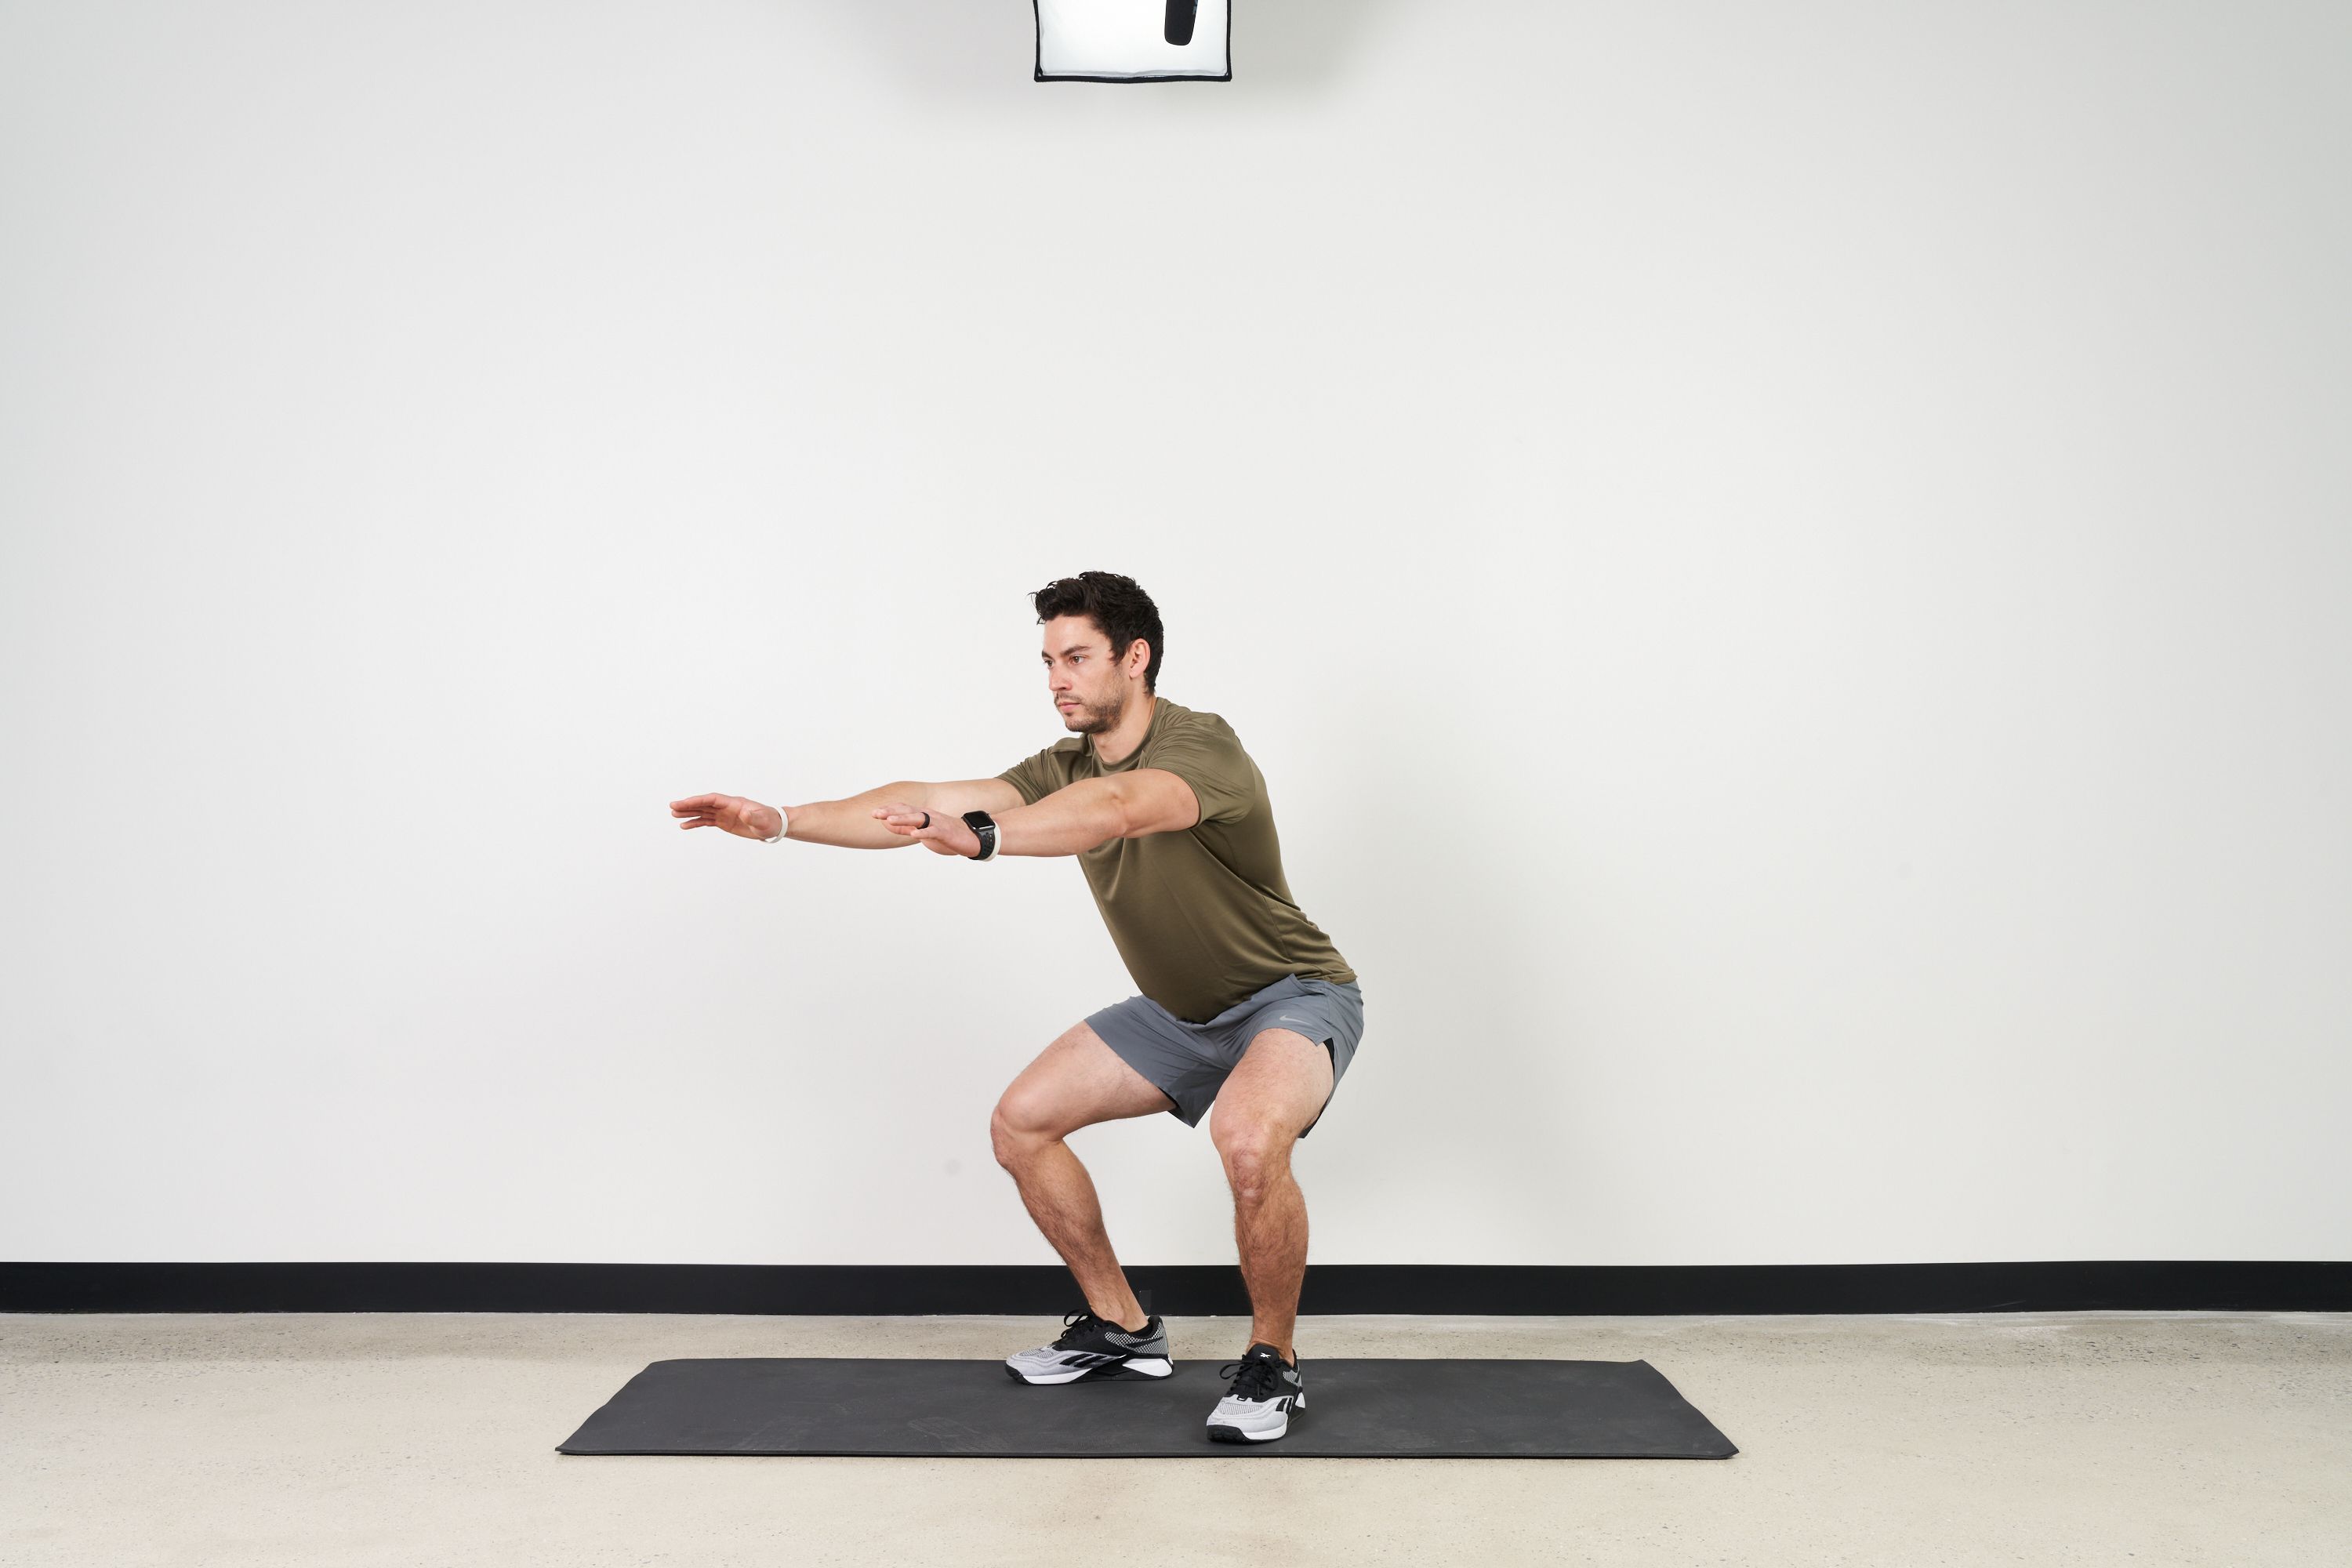 The 30-Day Squat Challenge to Build Strength In Your Butt and Legs